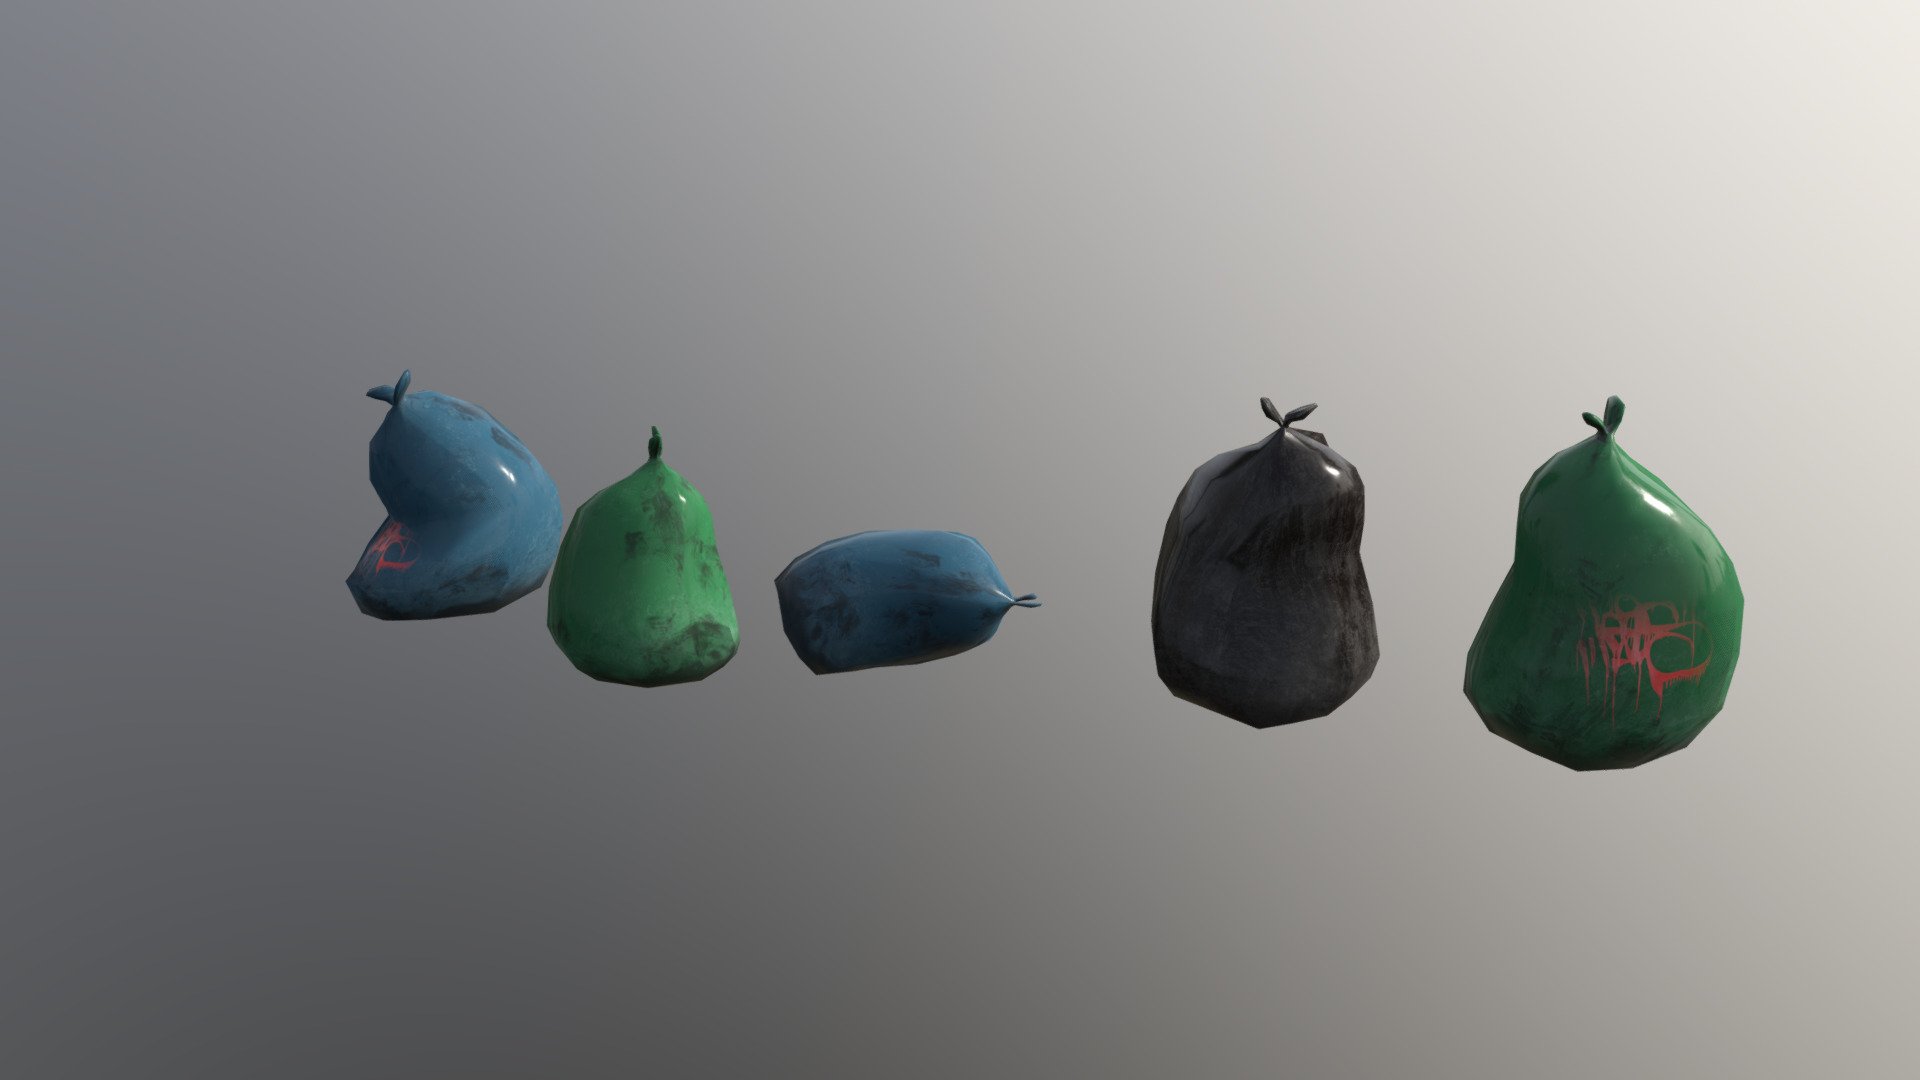 5 Kinds of Trashbags low poly in Pbr materials with textures in Substance painter 3d model